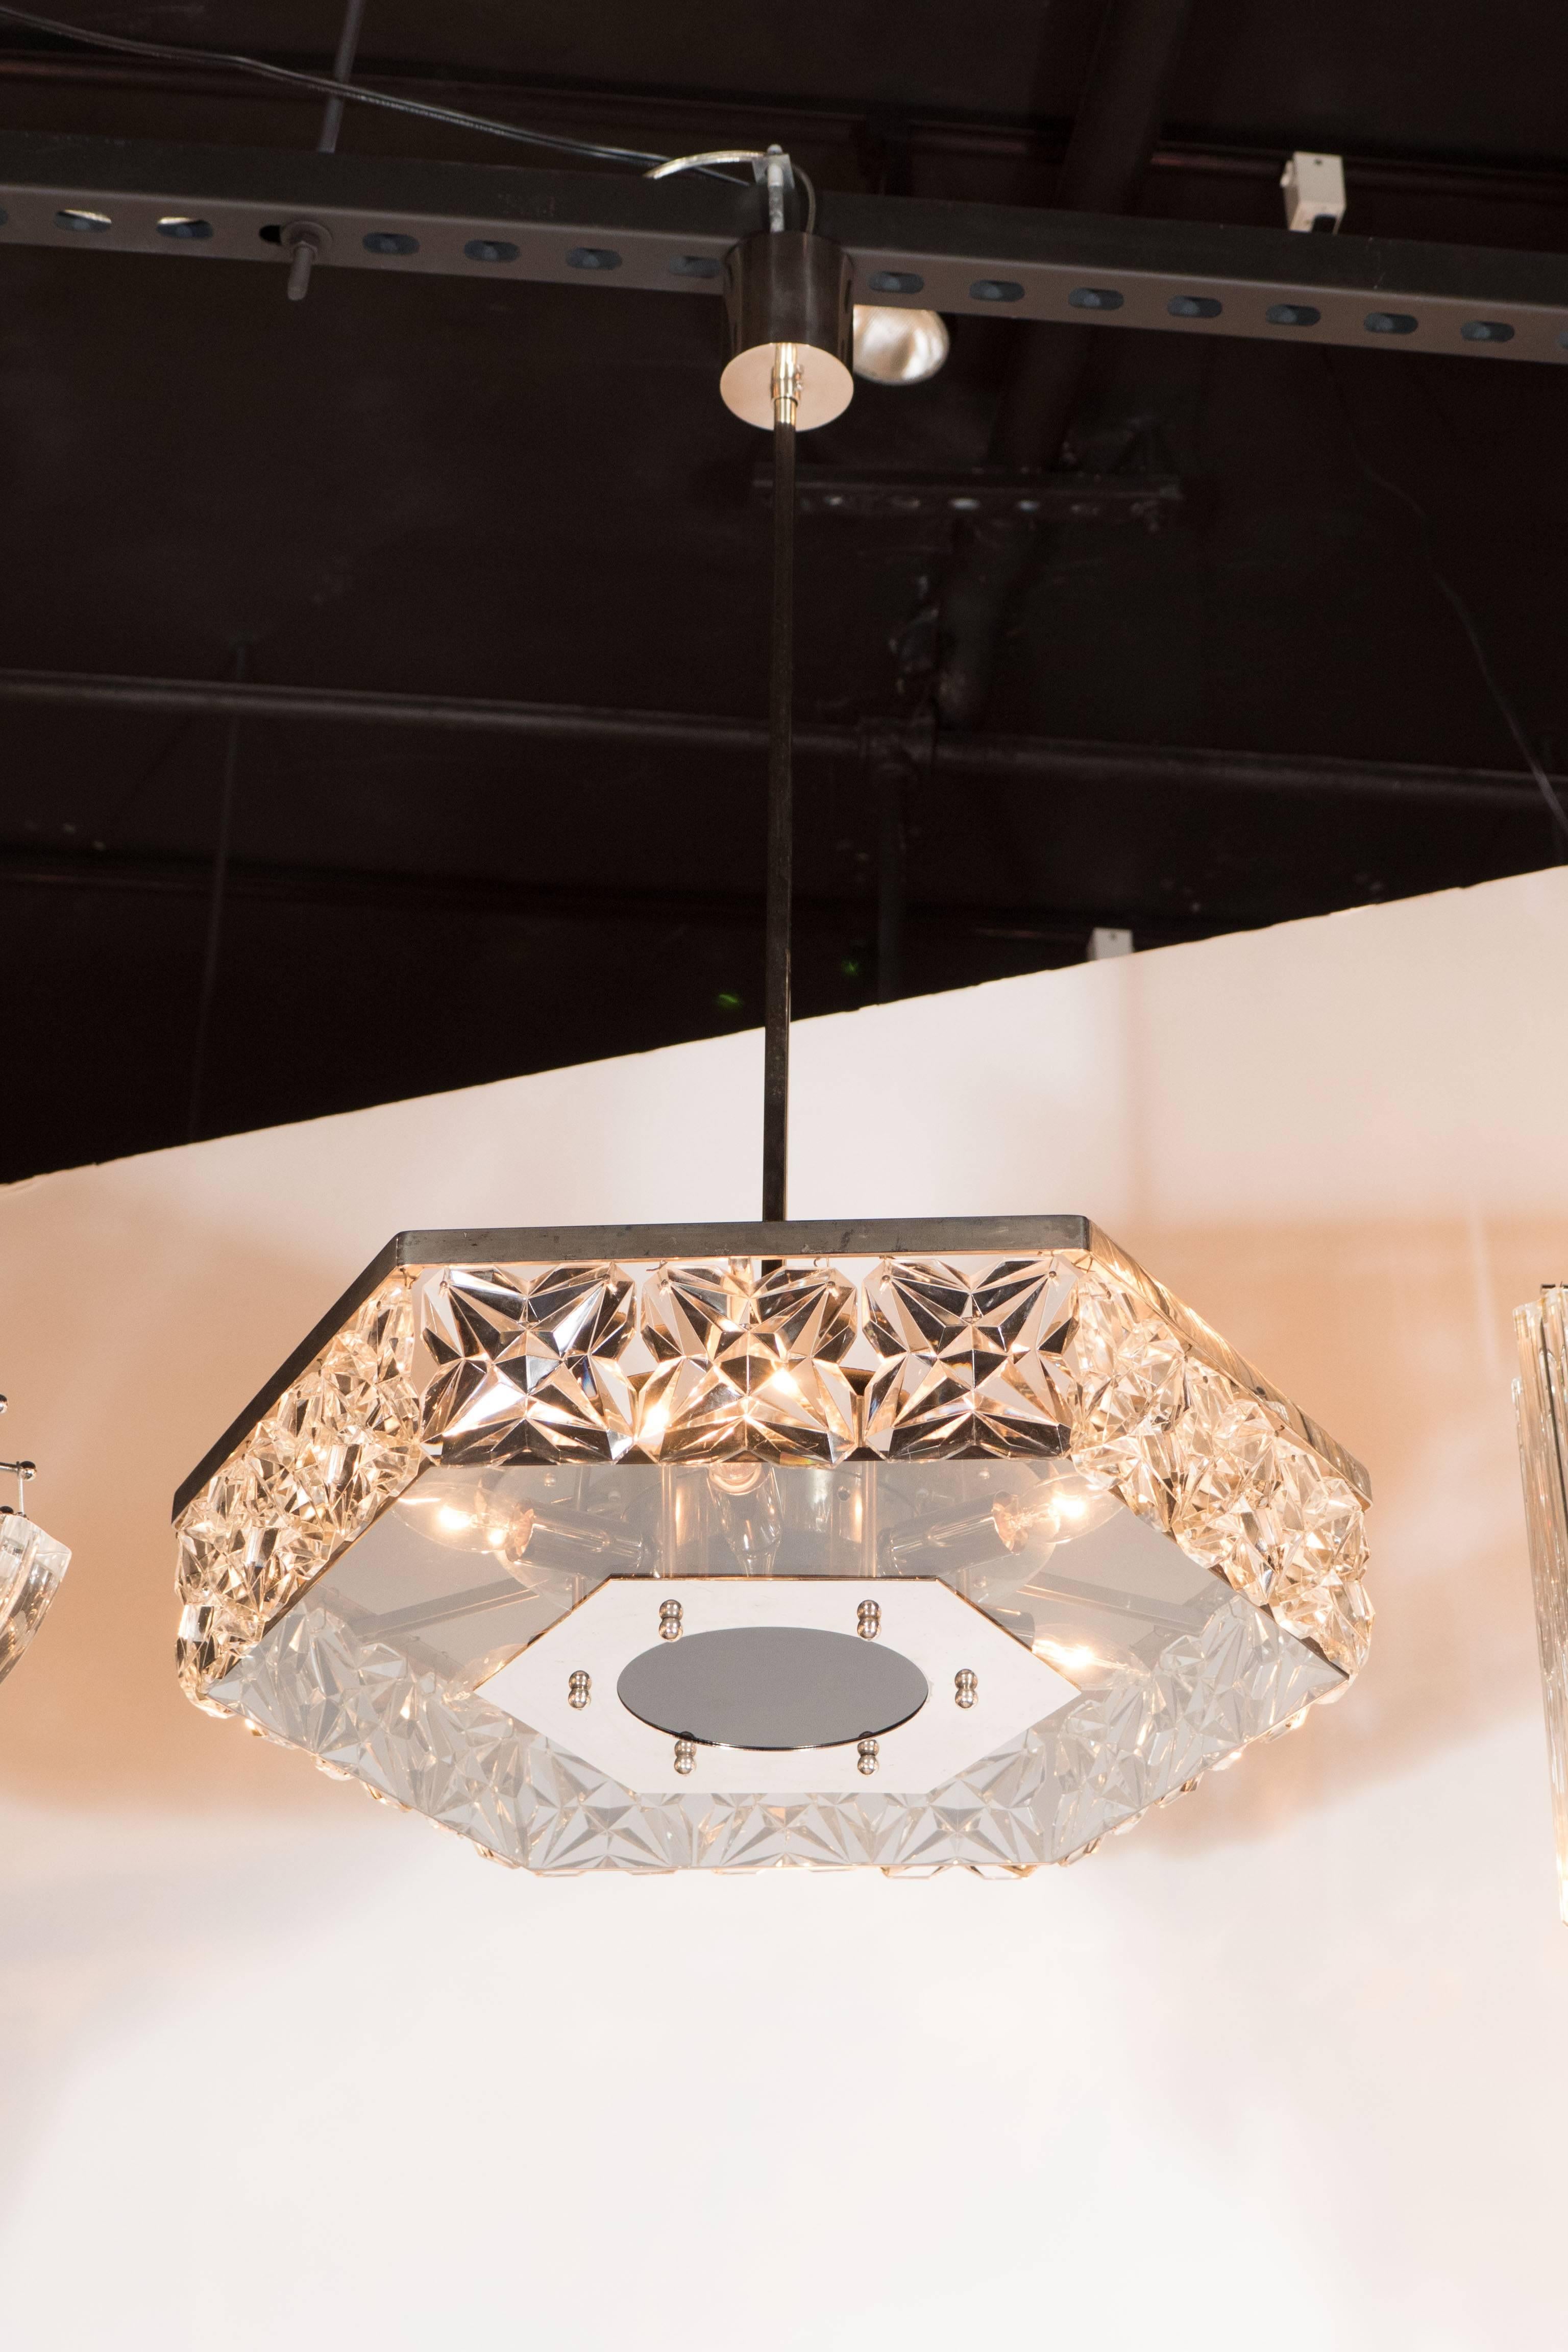 Mid-Century modernist faceted crystal chandelier in hexagonal form by Kinkeldey. Squares of hand-cut faceted crystals rest side by side, supported by central chrome ball fittings, in a hexagonal, single tiered concession. The piece is banded with